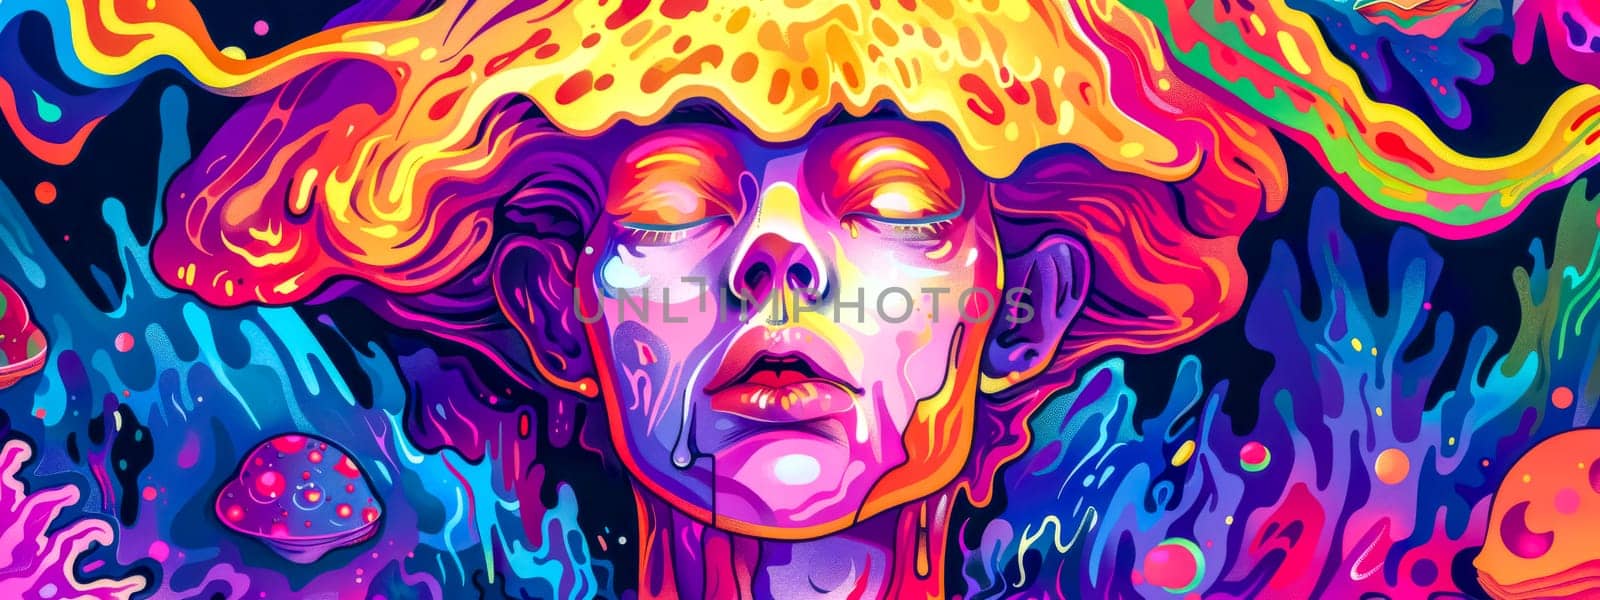 Vibrant and surreal digital art portrait with psychedelic, vibrant, and colorful elements depicting a fantastical dreamscape featuring mushrooms, abstract hallucinations, and imaginative creativity